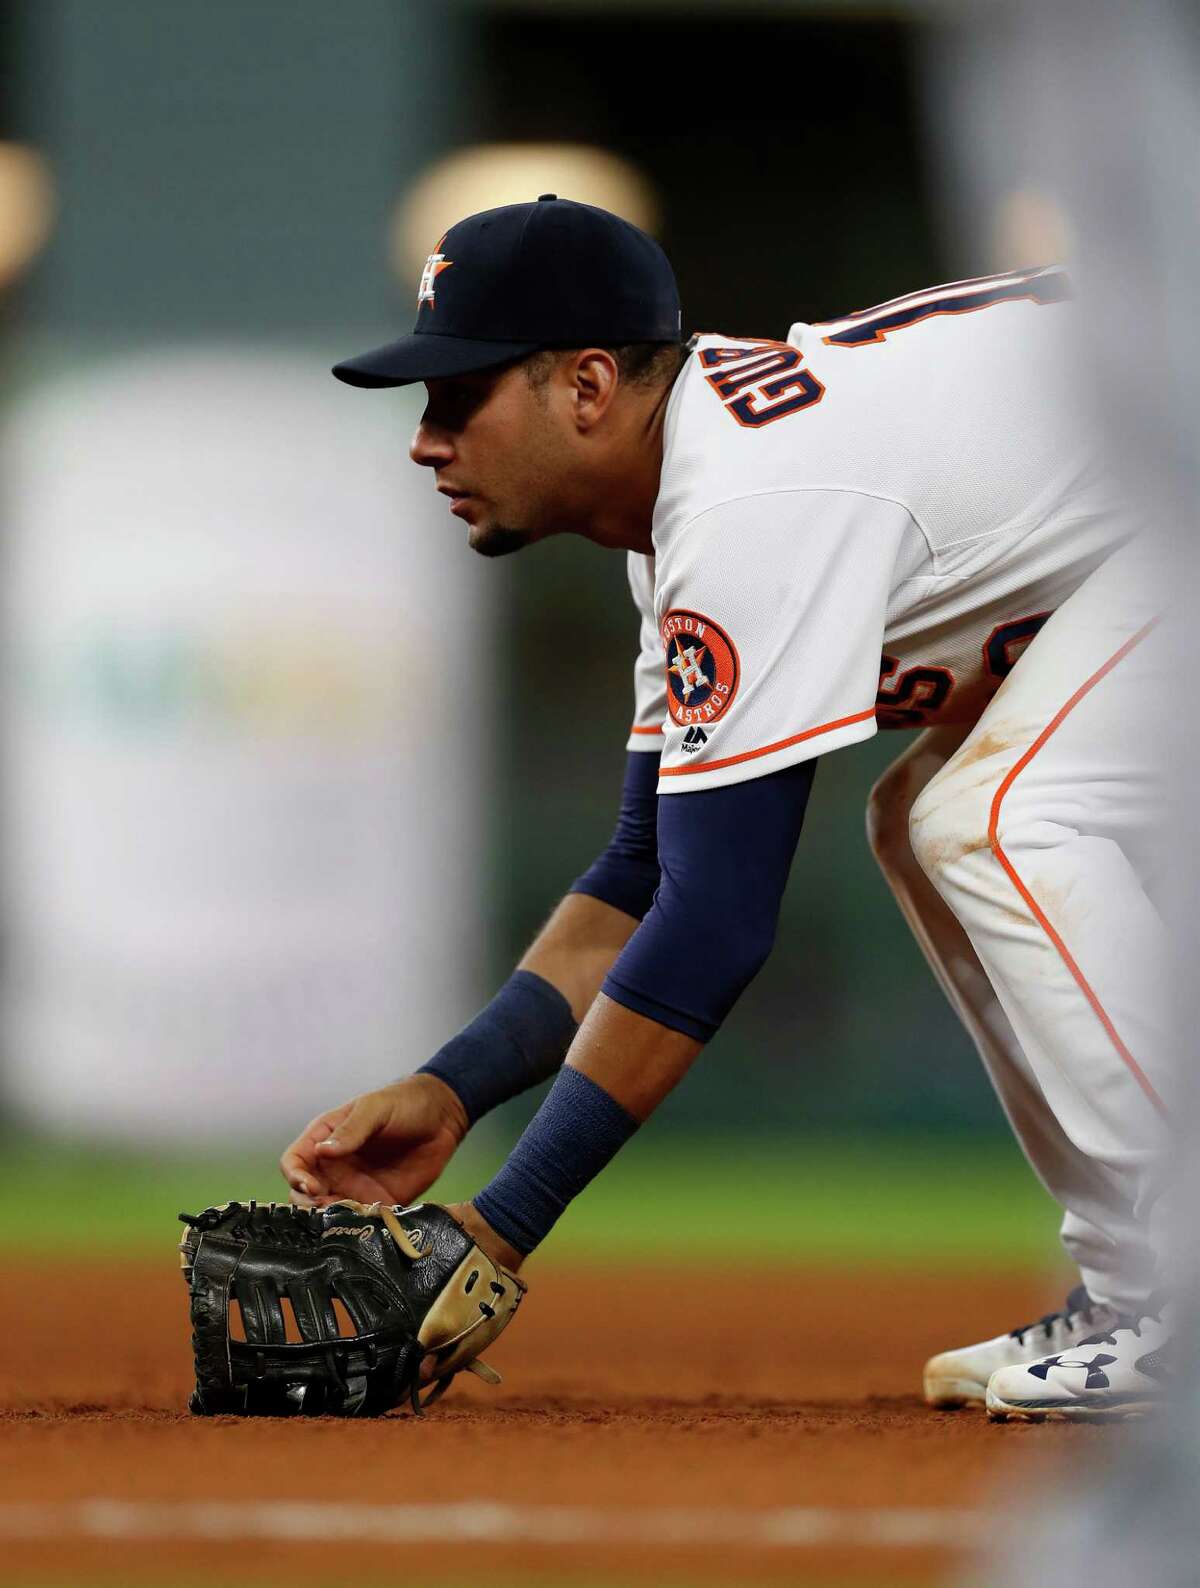 Houston Astros first baseman Yulieski Gurriel (10) gets into his defensive stance during the eighth inning of an MLB game at Minute Maid Park, Monday, Sept. 12, 2016 in Houston. ( Karen Warren / Houston Chronicle )